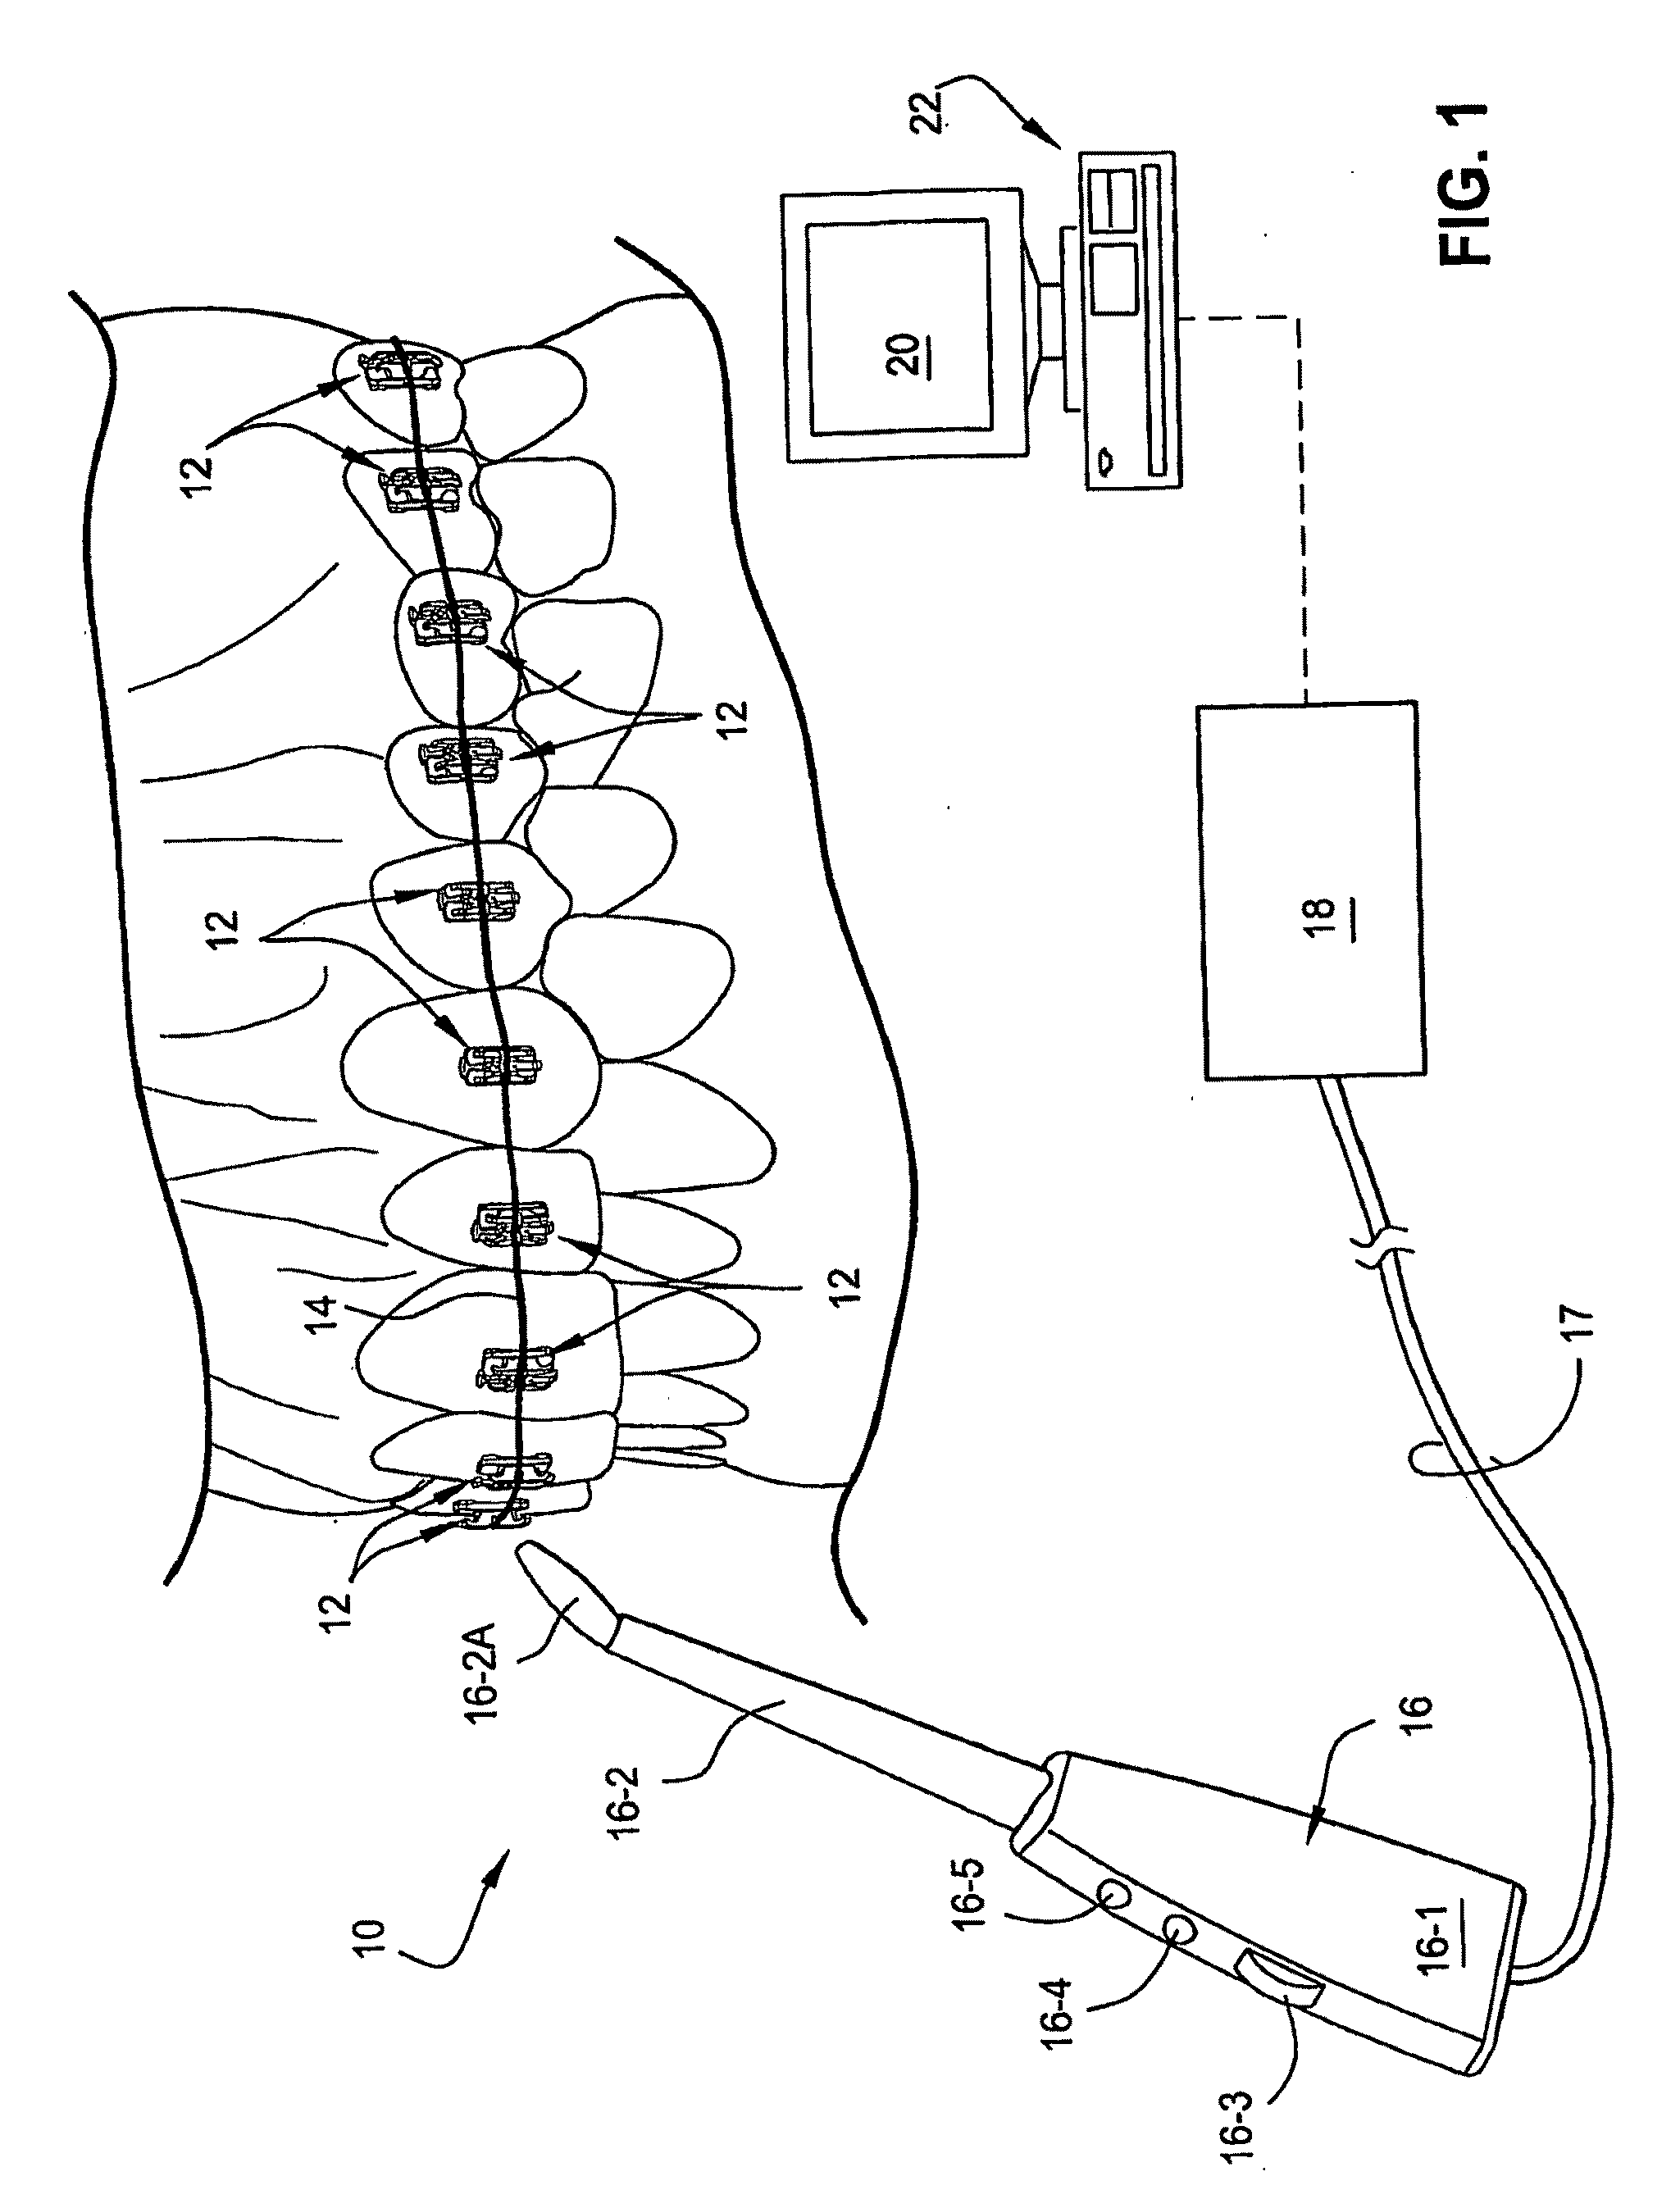 Method and System for Determining a Force and/or Torque Applied to an Orthodontic Bracket